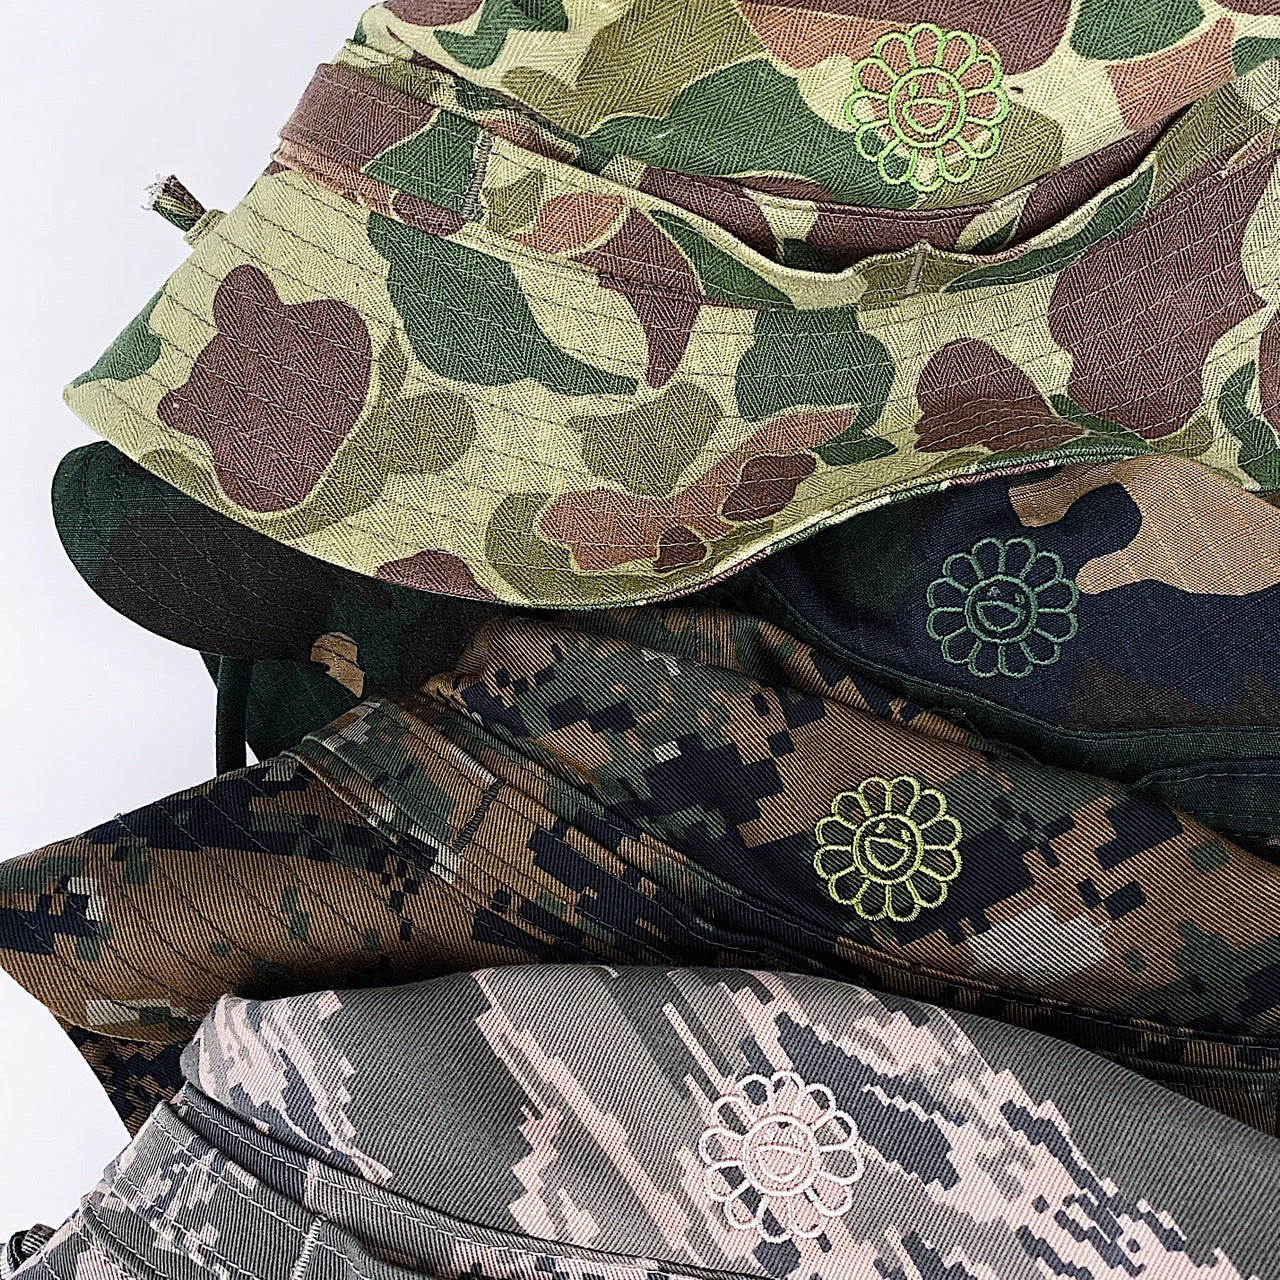 【©Takashi Murakami / kaikai kiki】 Camouflage Bucket Hat will be on sale online from 20:00 today, August 29th (Tuesday)!